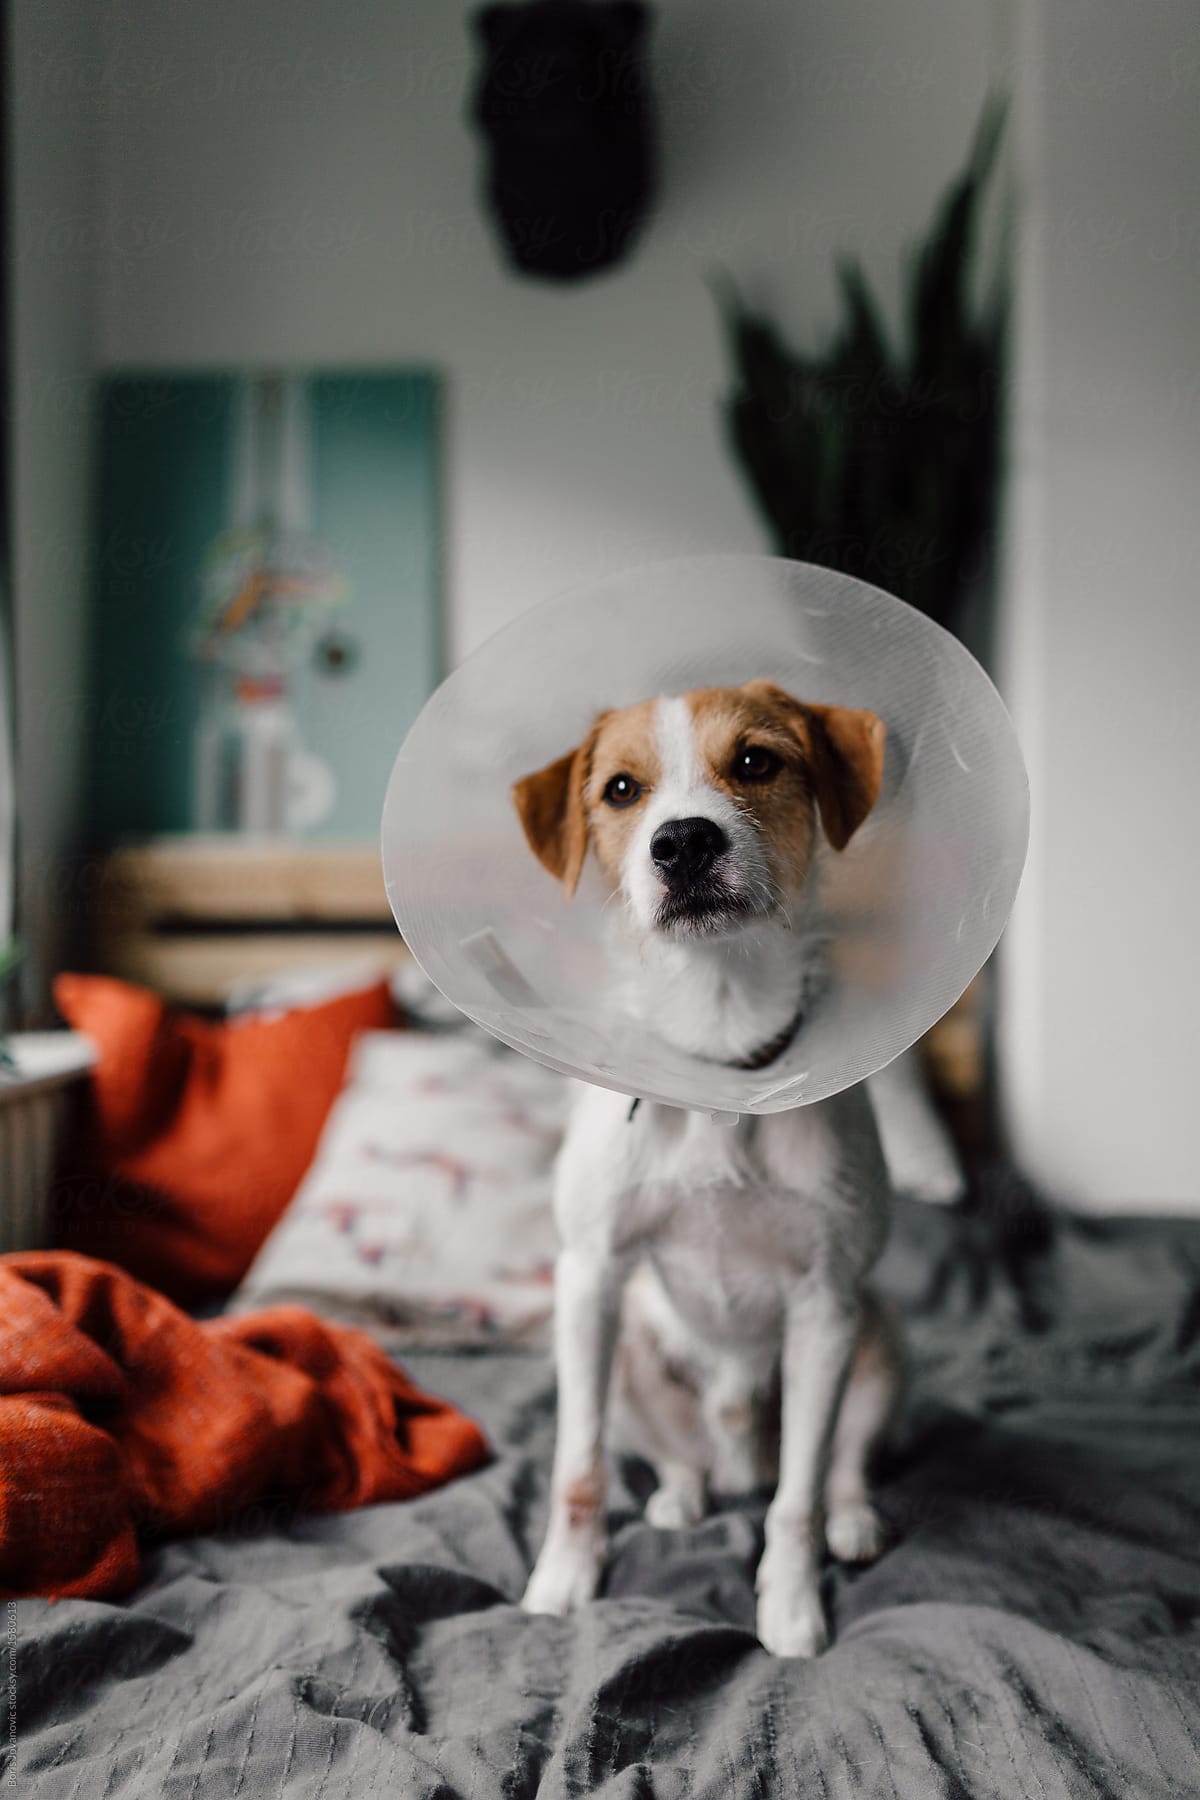 Dog with a cone standing on the bed